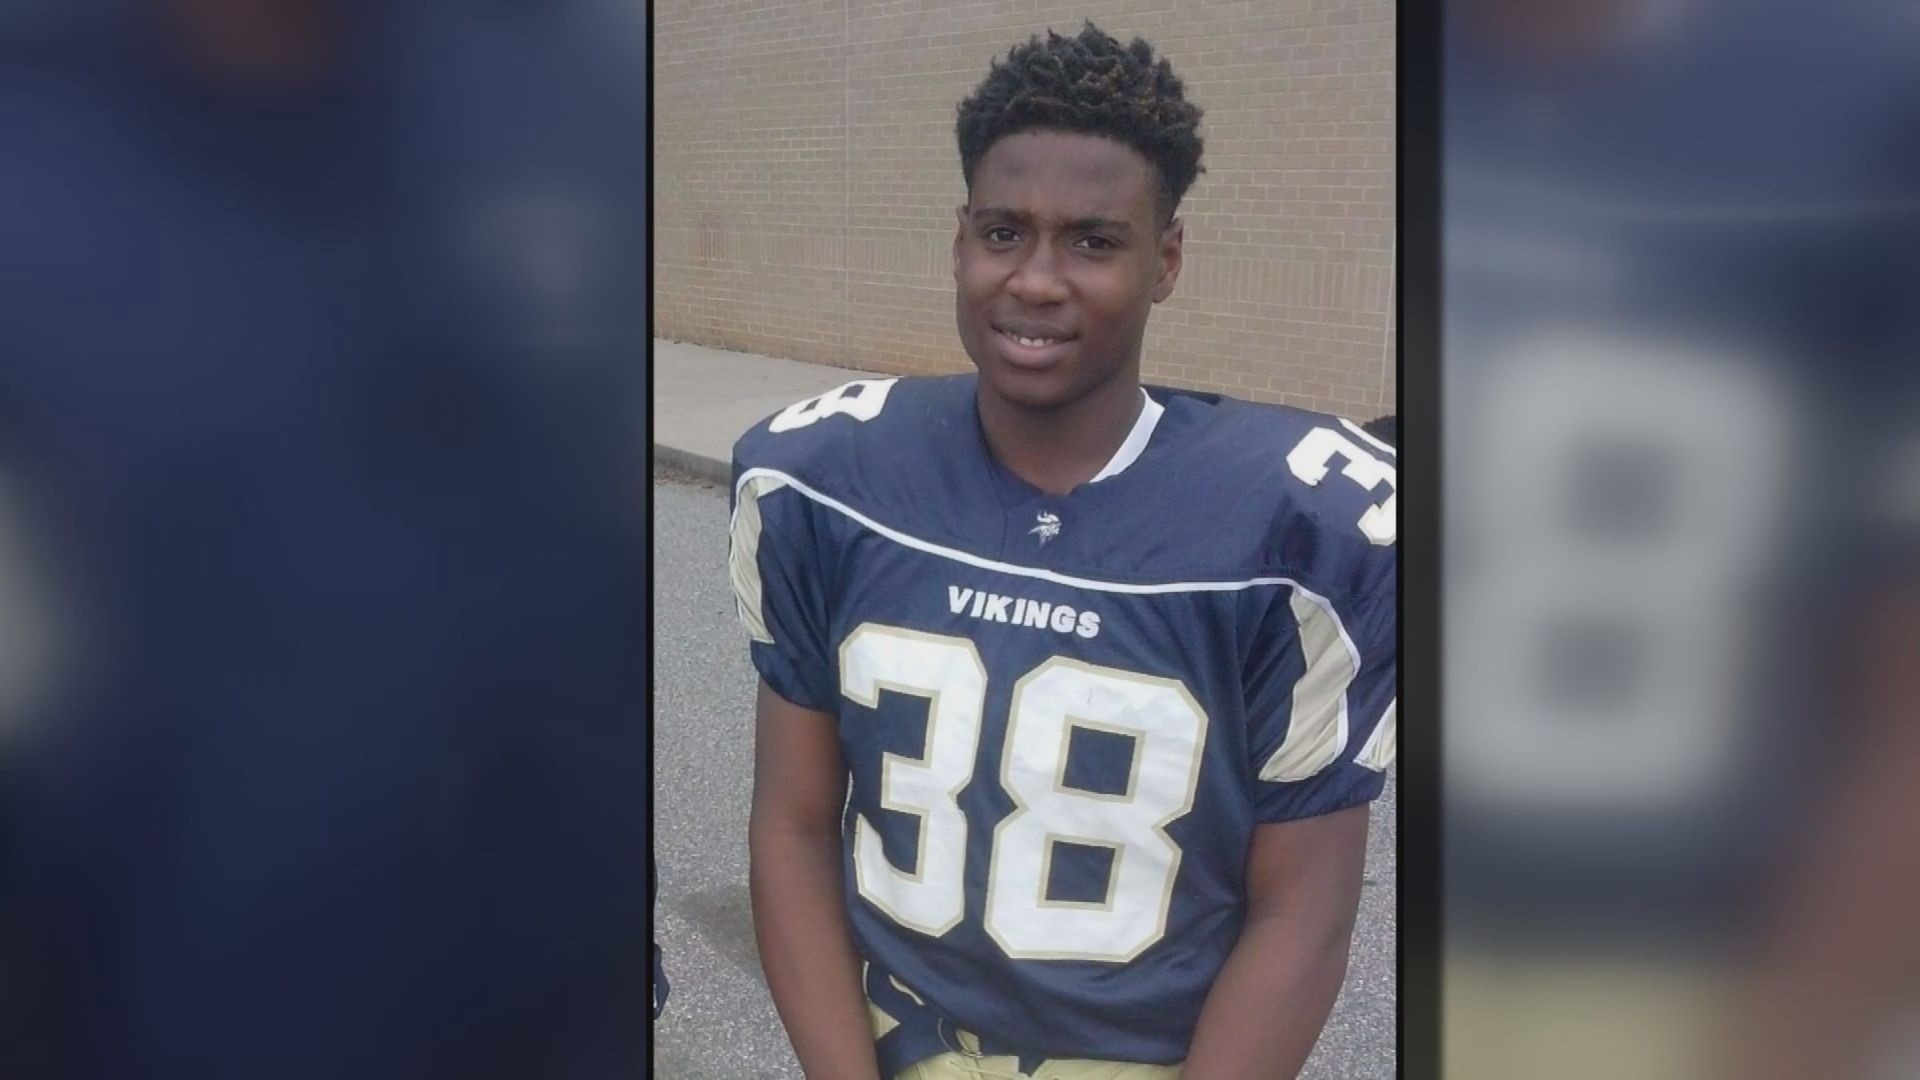 Spartanburg High School Senior Nick Dixon died Friday from complications during surgery to repair his ACL and Meniscus.